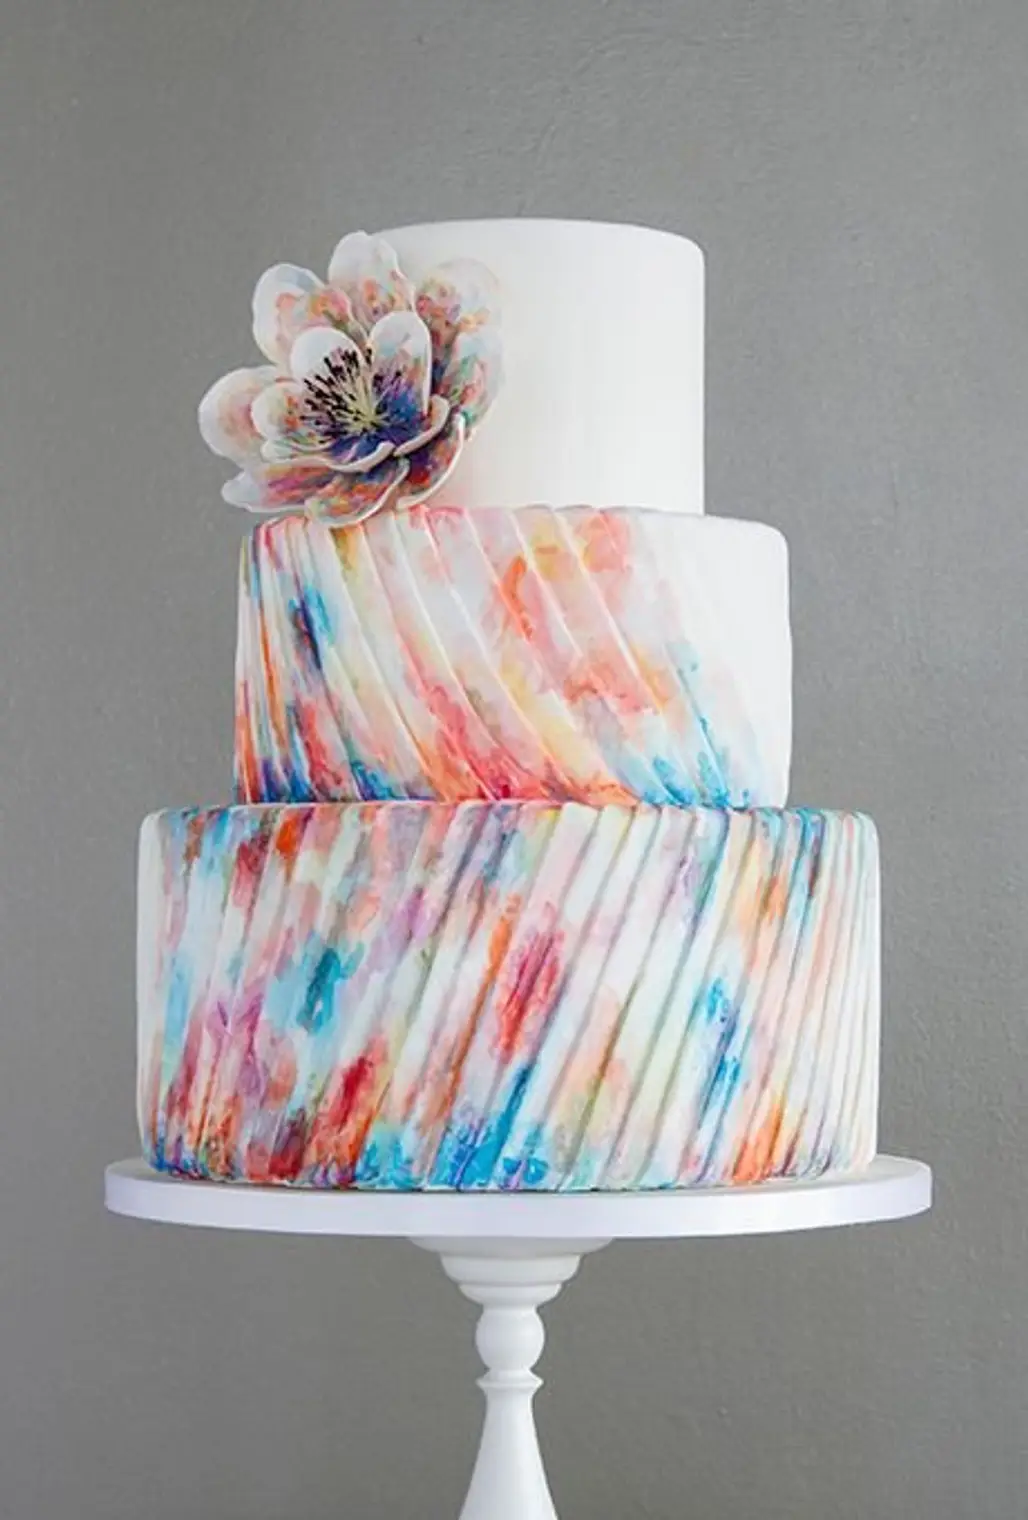 Watercolor Pleated Cake